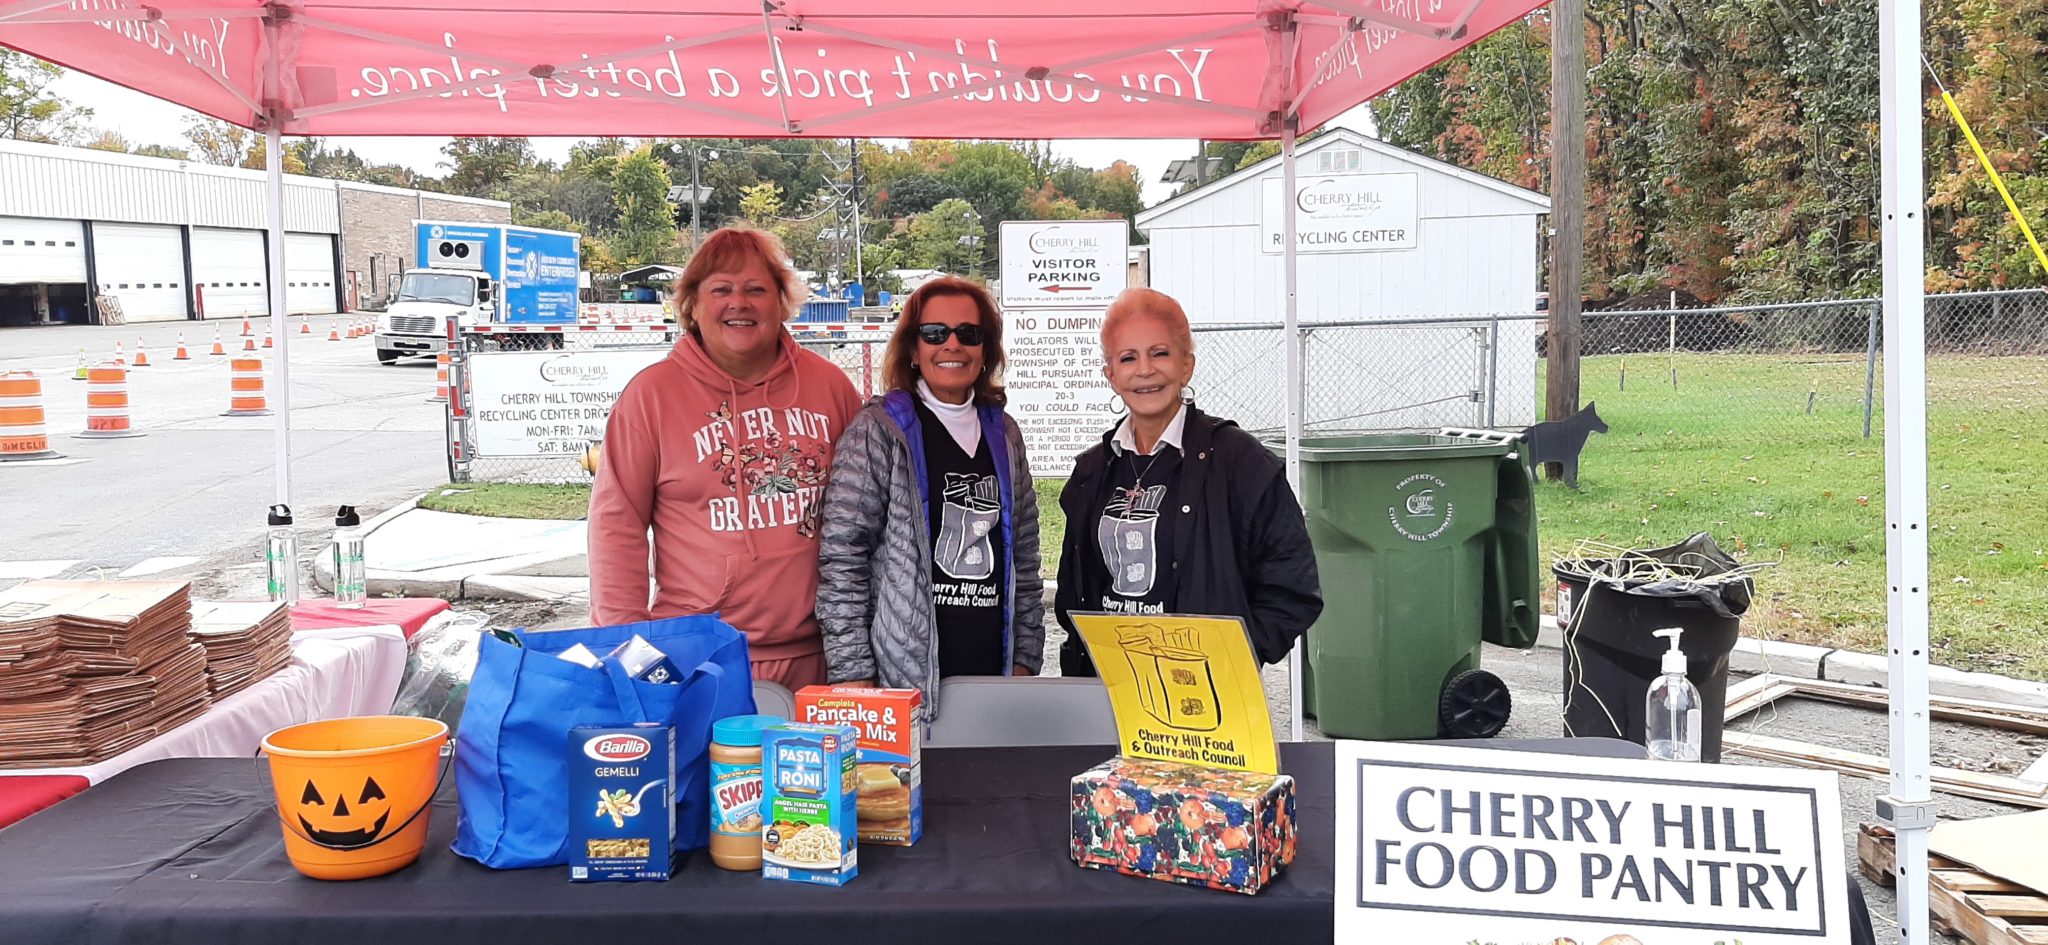 Cherry Hill Township Shredding Event nets 781 Pounds of Food